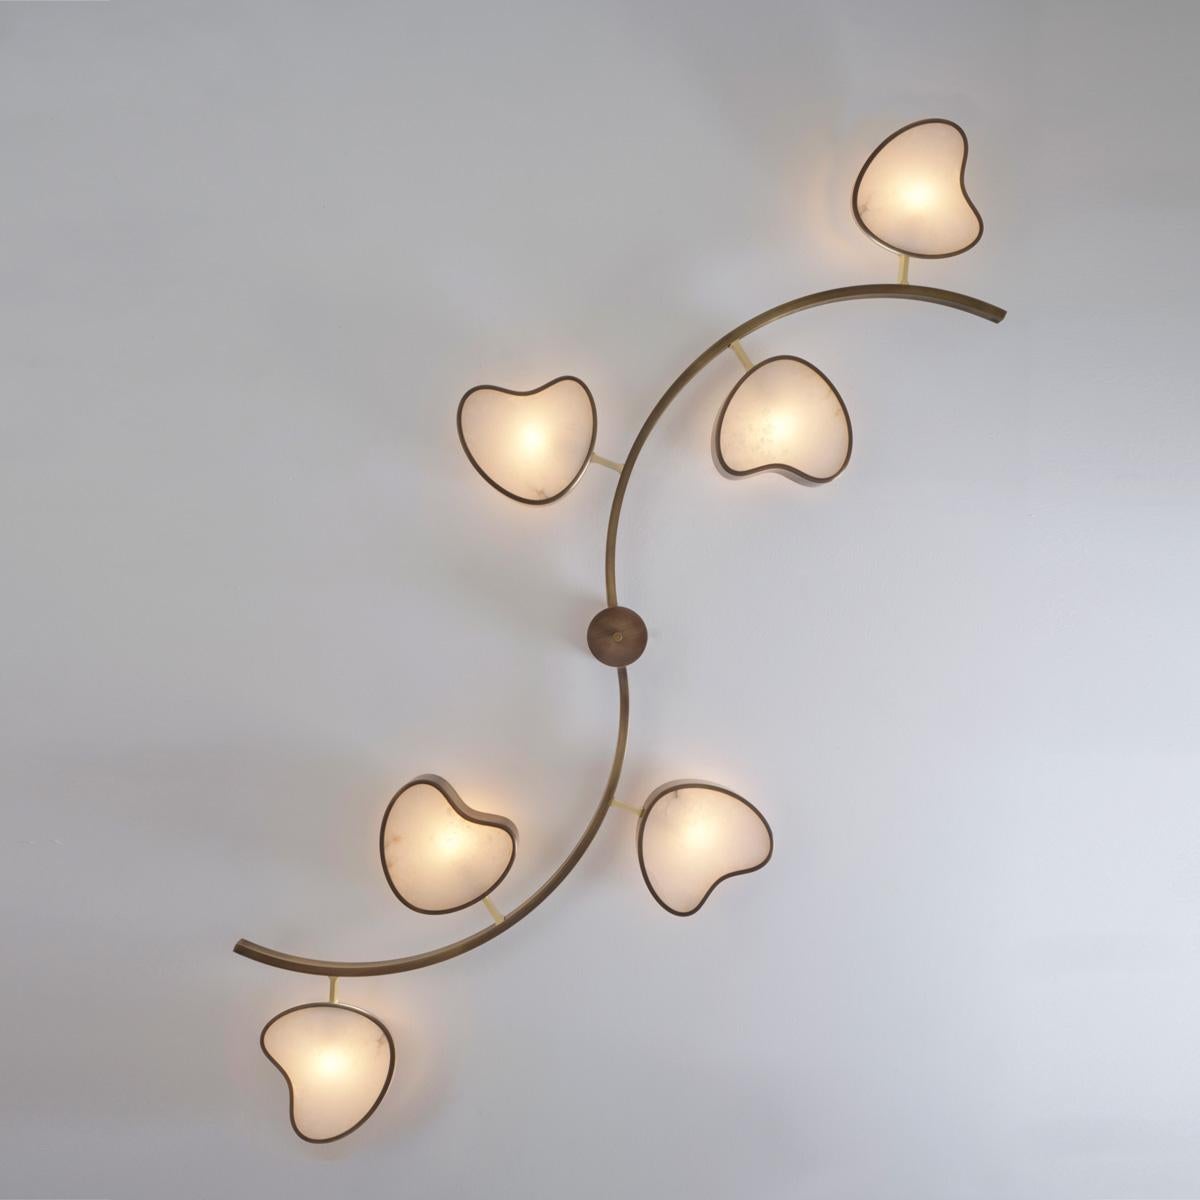 Italian Cuore N.6 Ceiling Light by Gaspare Asaro. Satin Brass and Sand White Finish For Sale